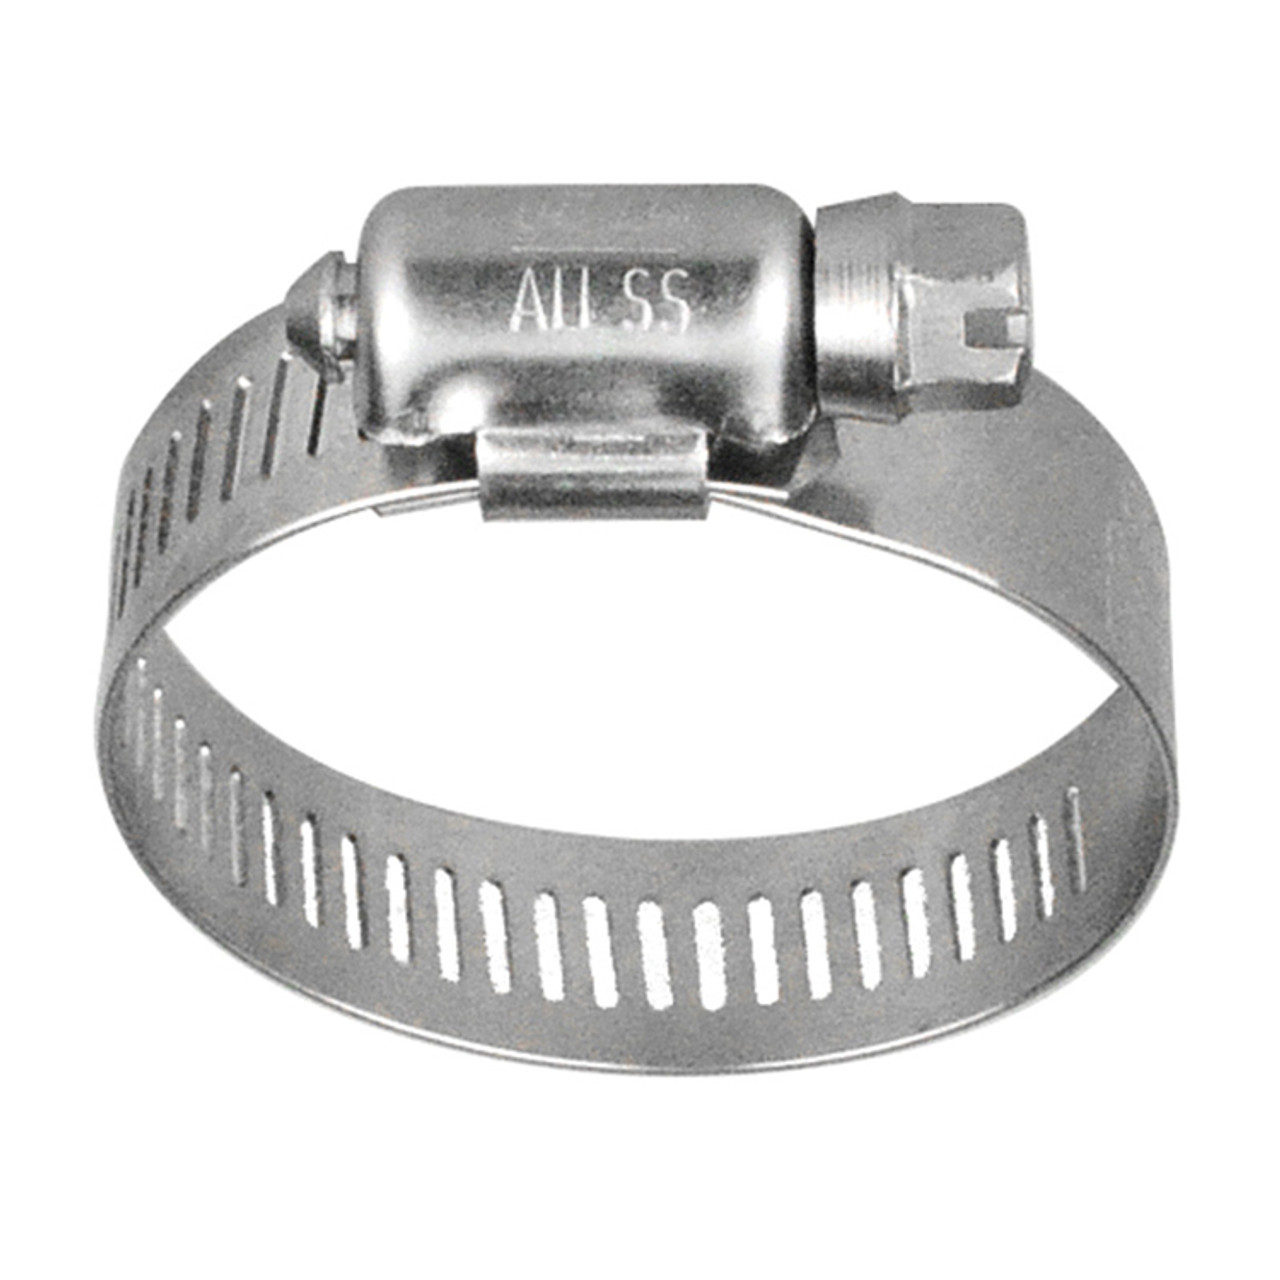 1/2" Stainless Steel Worm Gear Hose Clamp   G8-08